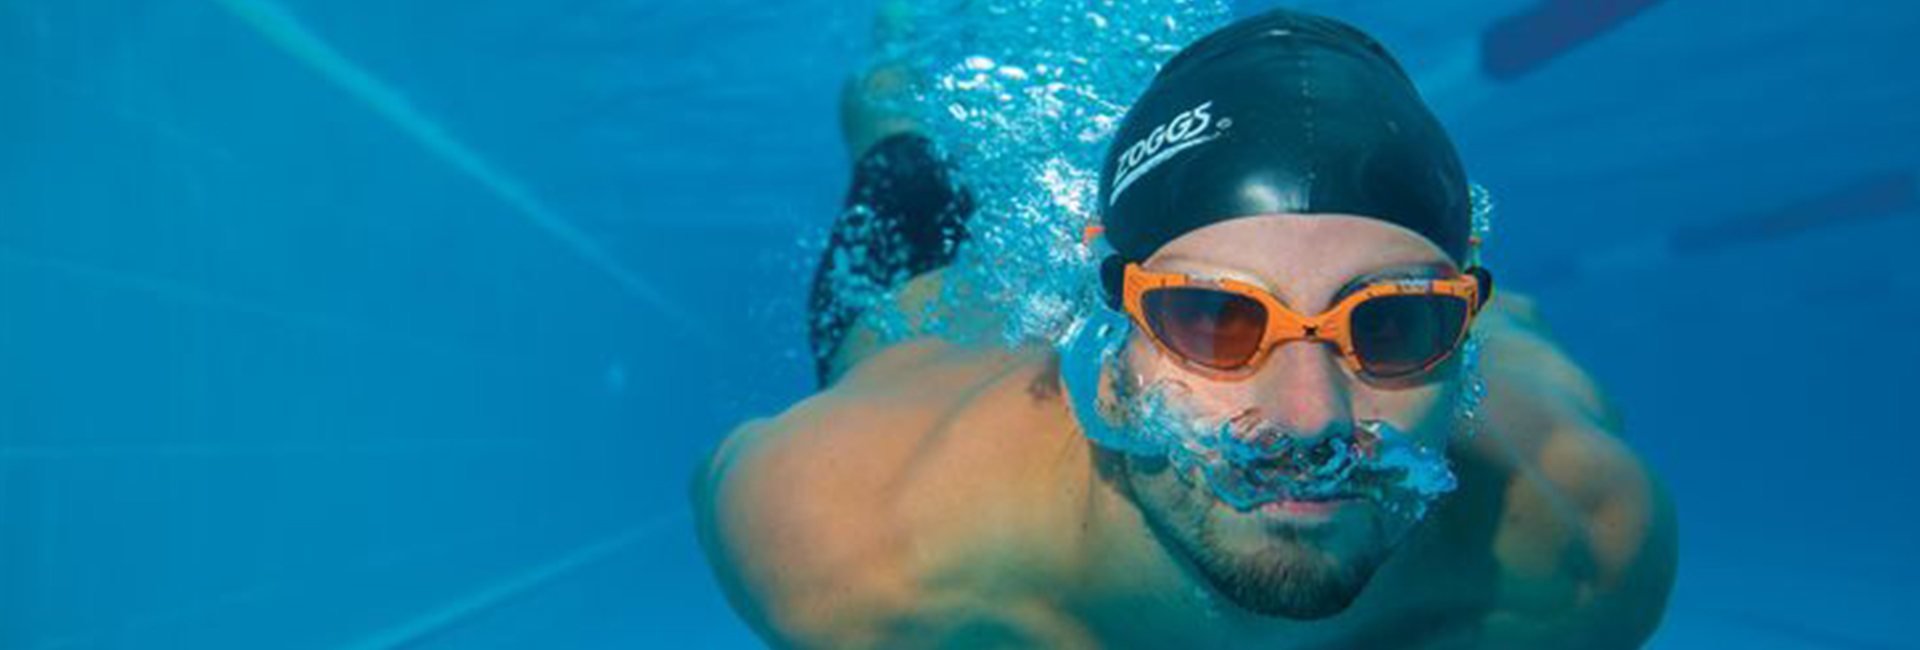 Athlete swimming underwater in the pool